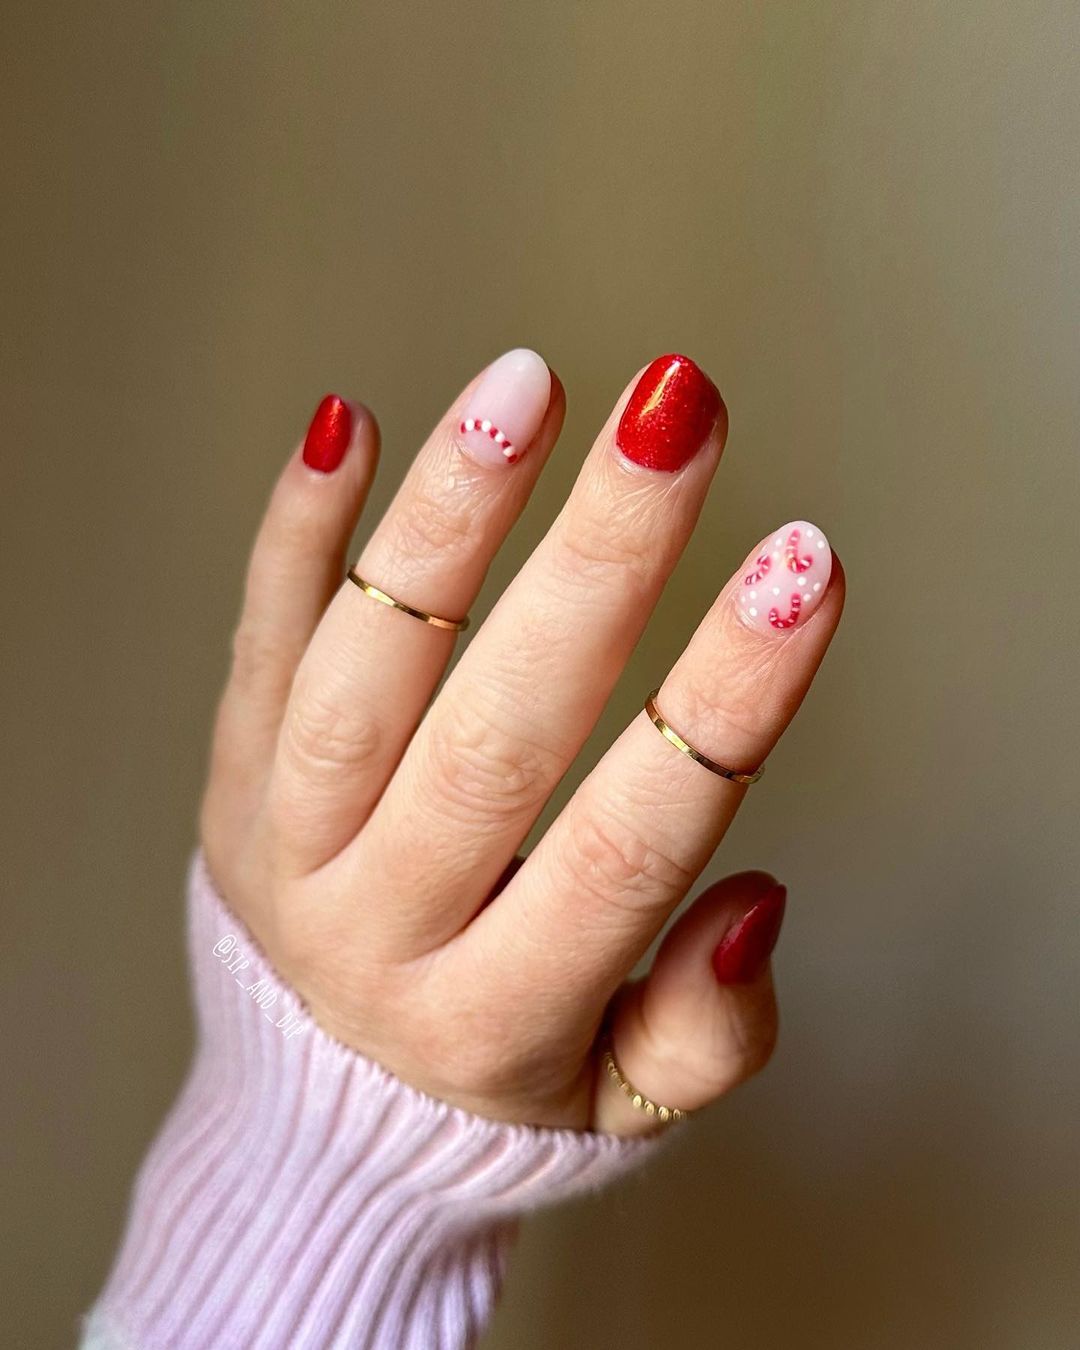 Red Simple Christmas Nails